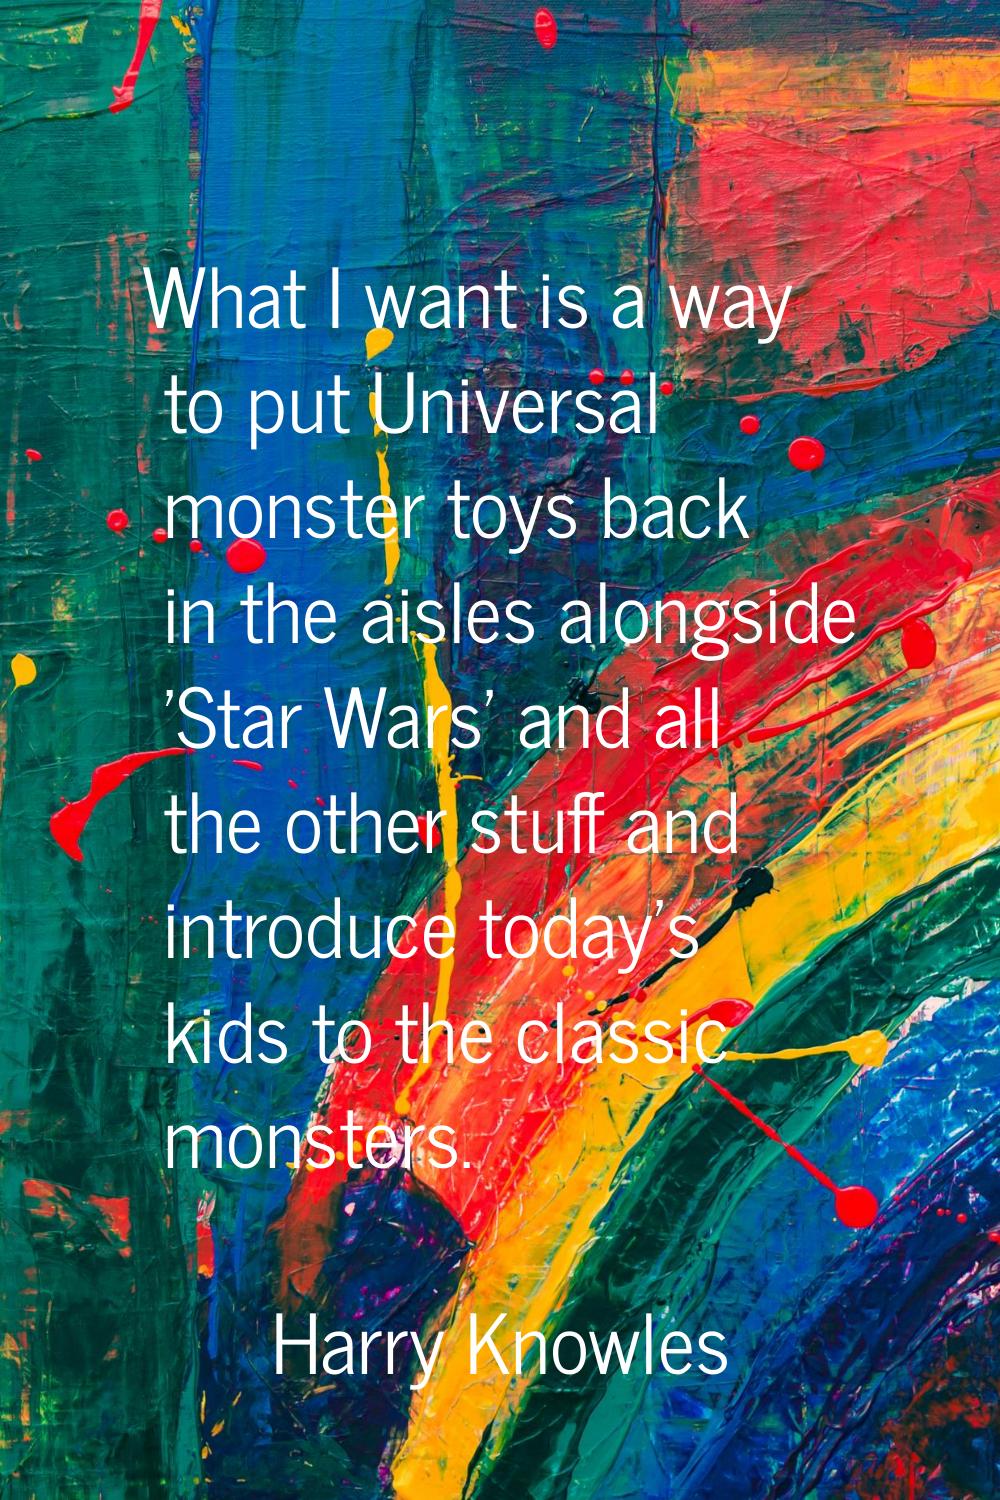 What I want is a way to put Universal monster toys back in the aisles alongside 'Star Wars' and all